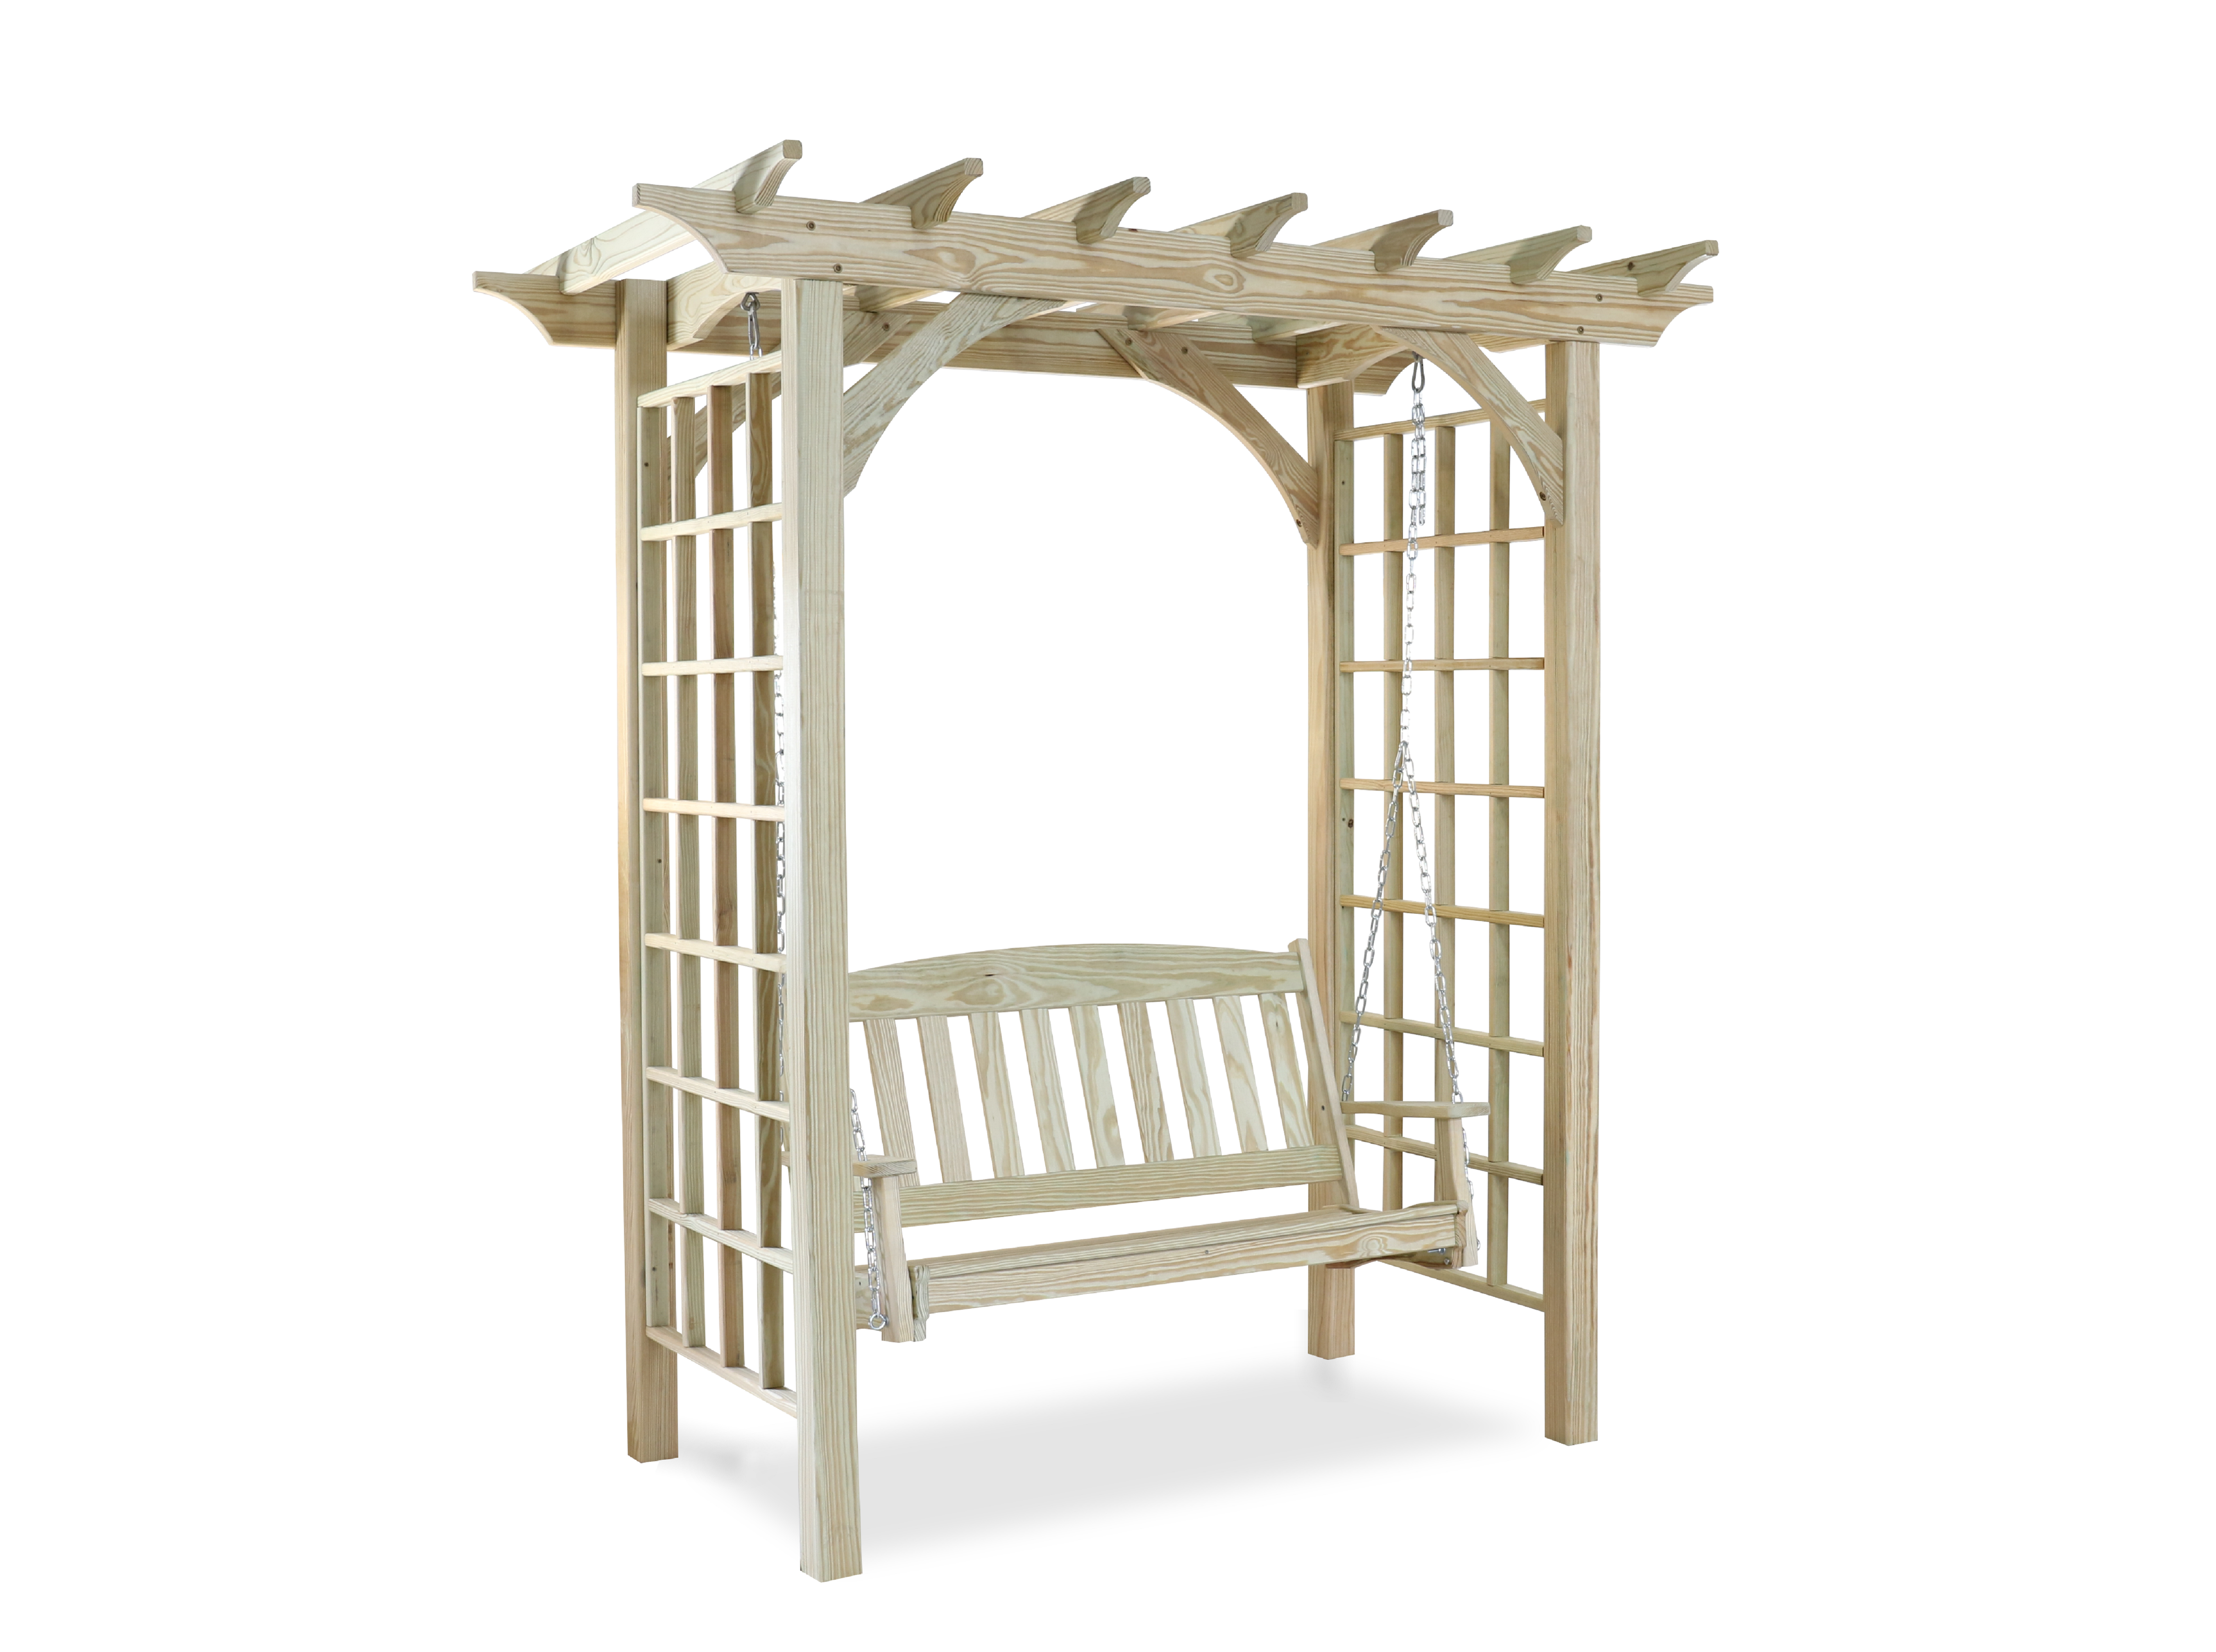 Wooden, Brandywine style, arbor with a swing.